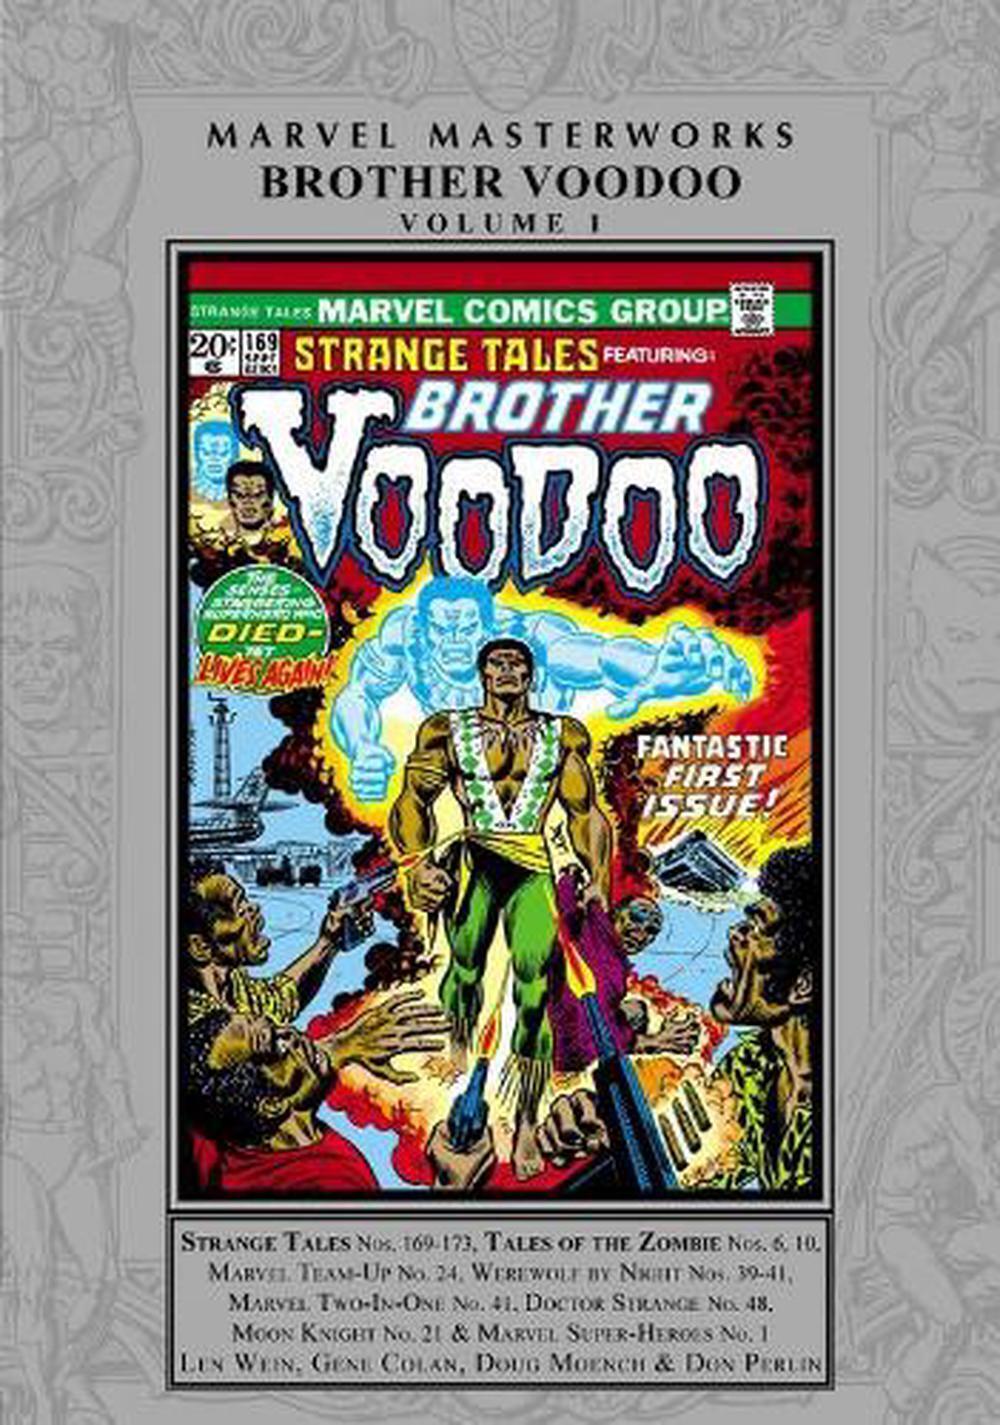 Marvel Masterworks: Brother Voodoo Vol. 1 by Lein Wein (English) Hardcover Book